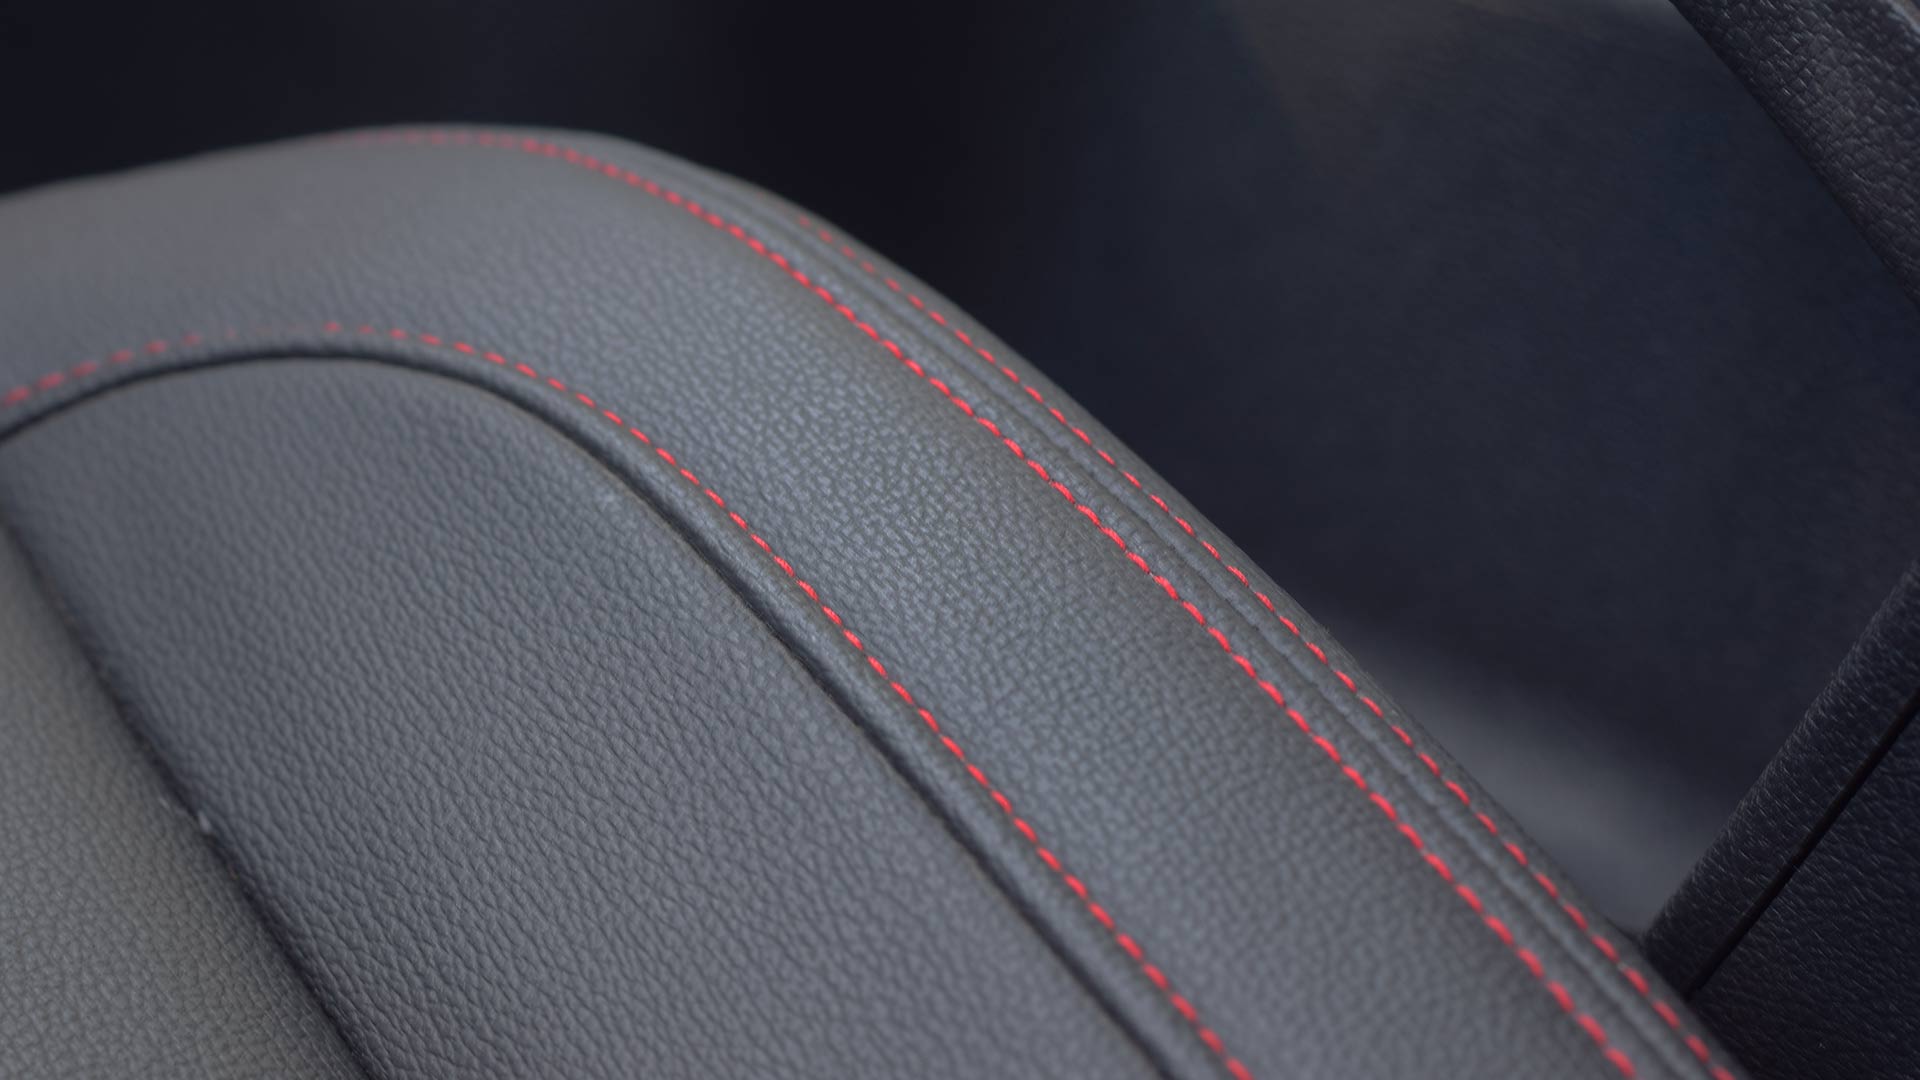 The Maxus T60 upholstery detail